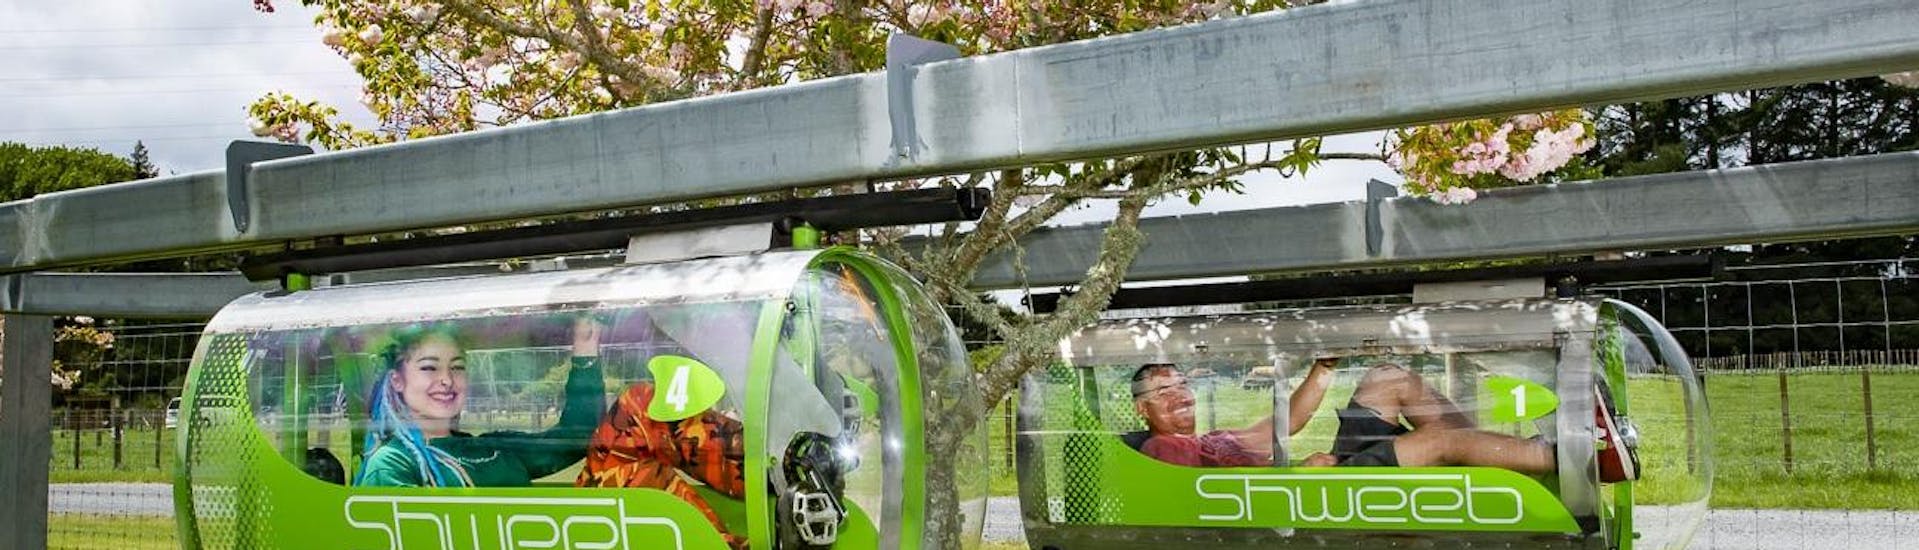 A girl is racing in an aerodynamic pod against her friend during the Shweeb Racer in Rotorua located in Velocity Valley Rotorua Adventure Park.